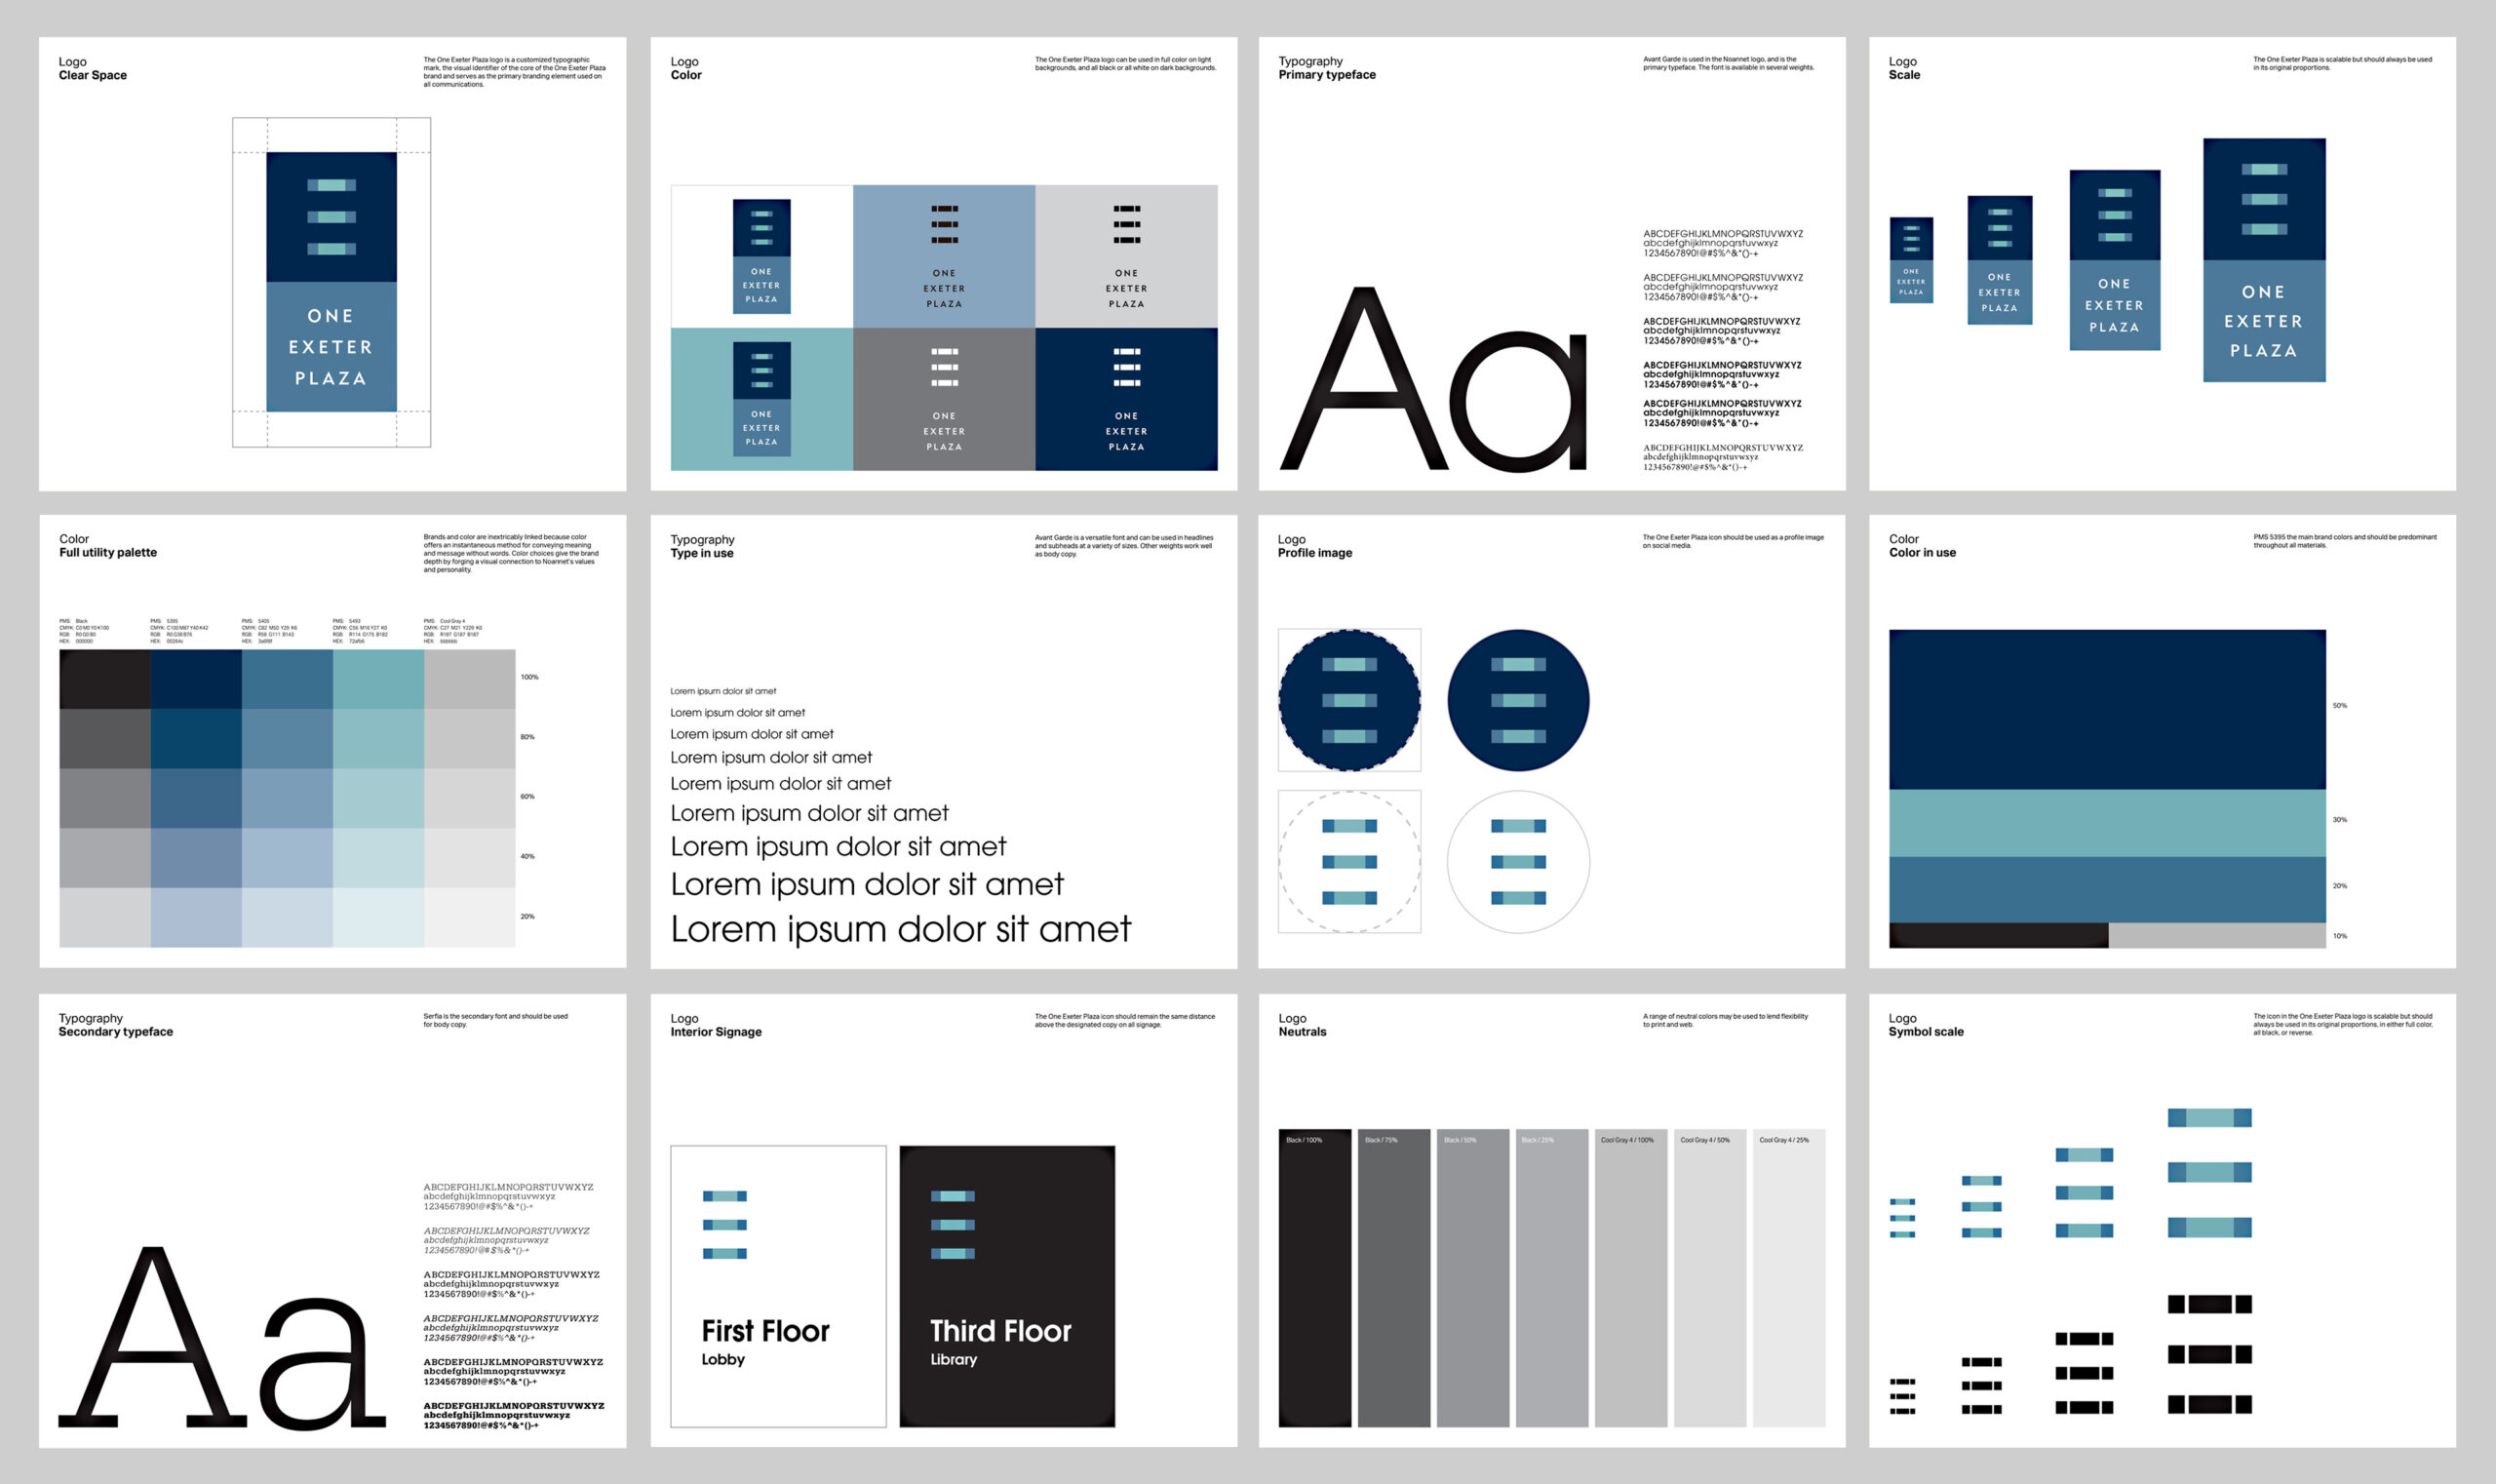 One Exeter brand guidelines